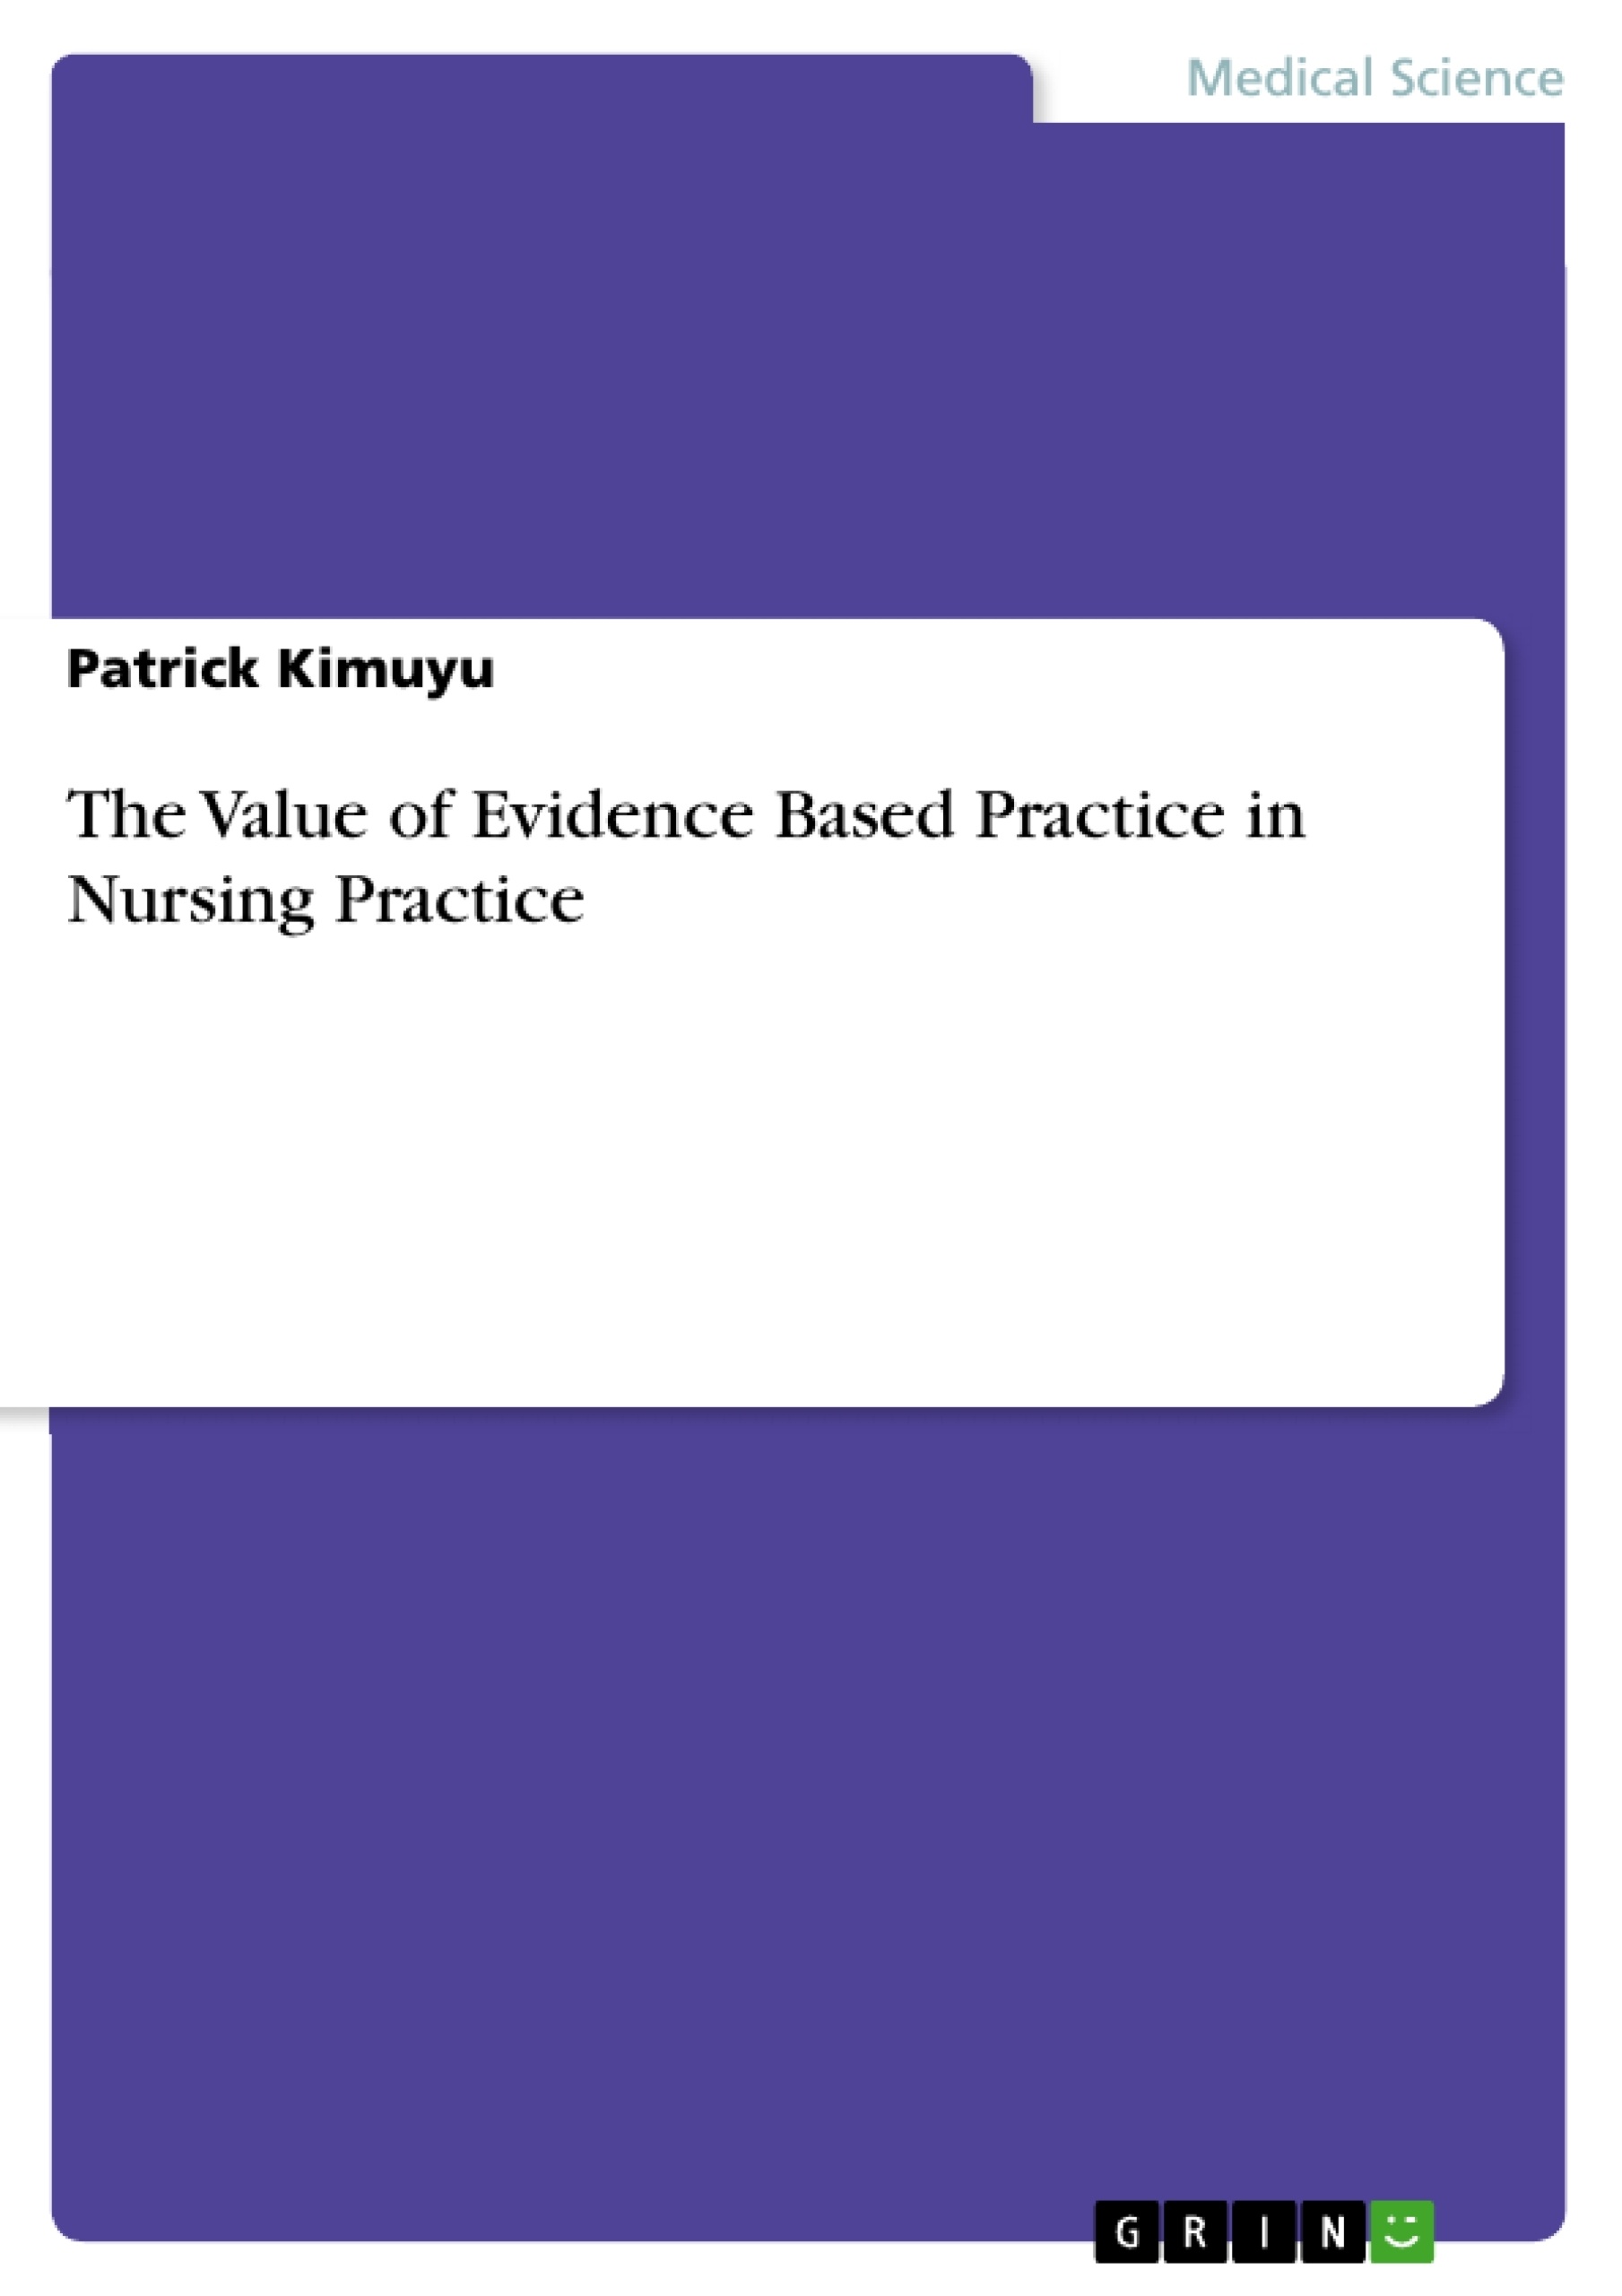 The Value of Evidence Based Practice in Nursing Practice - GRIN